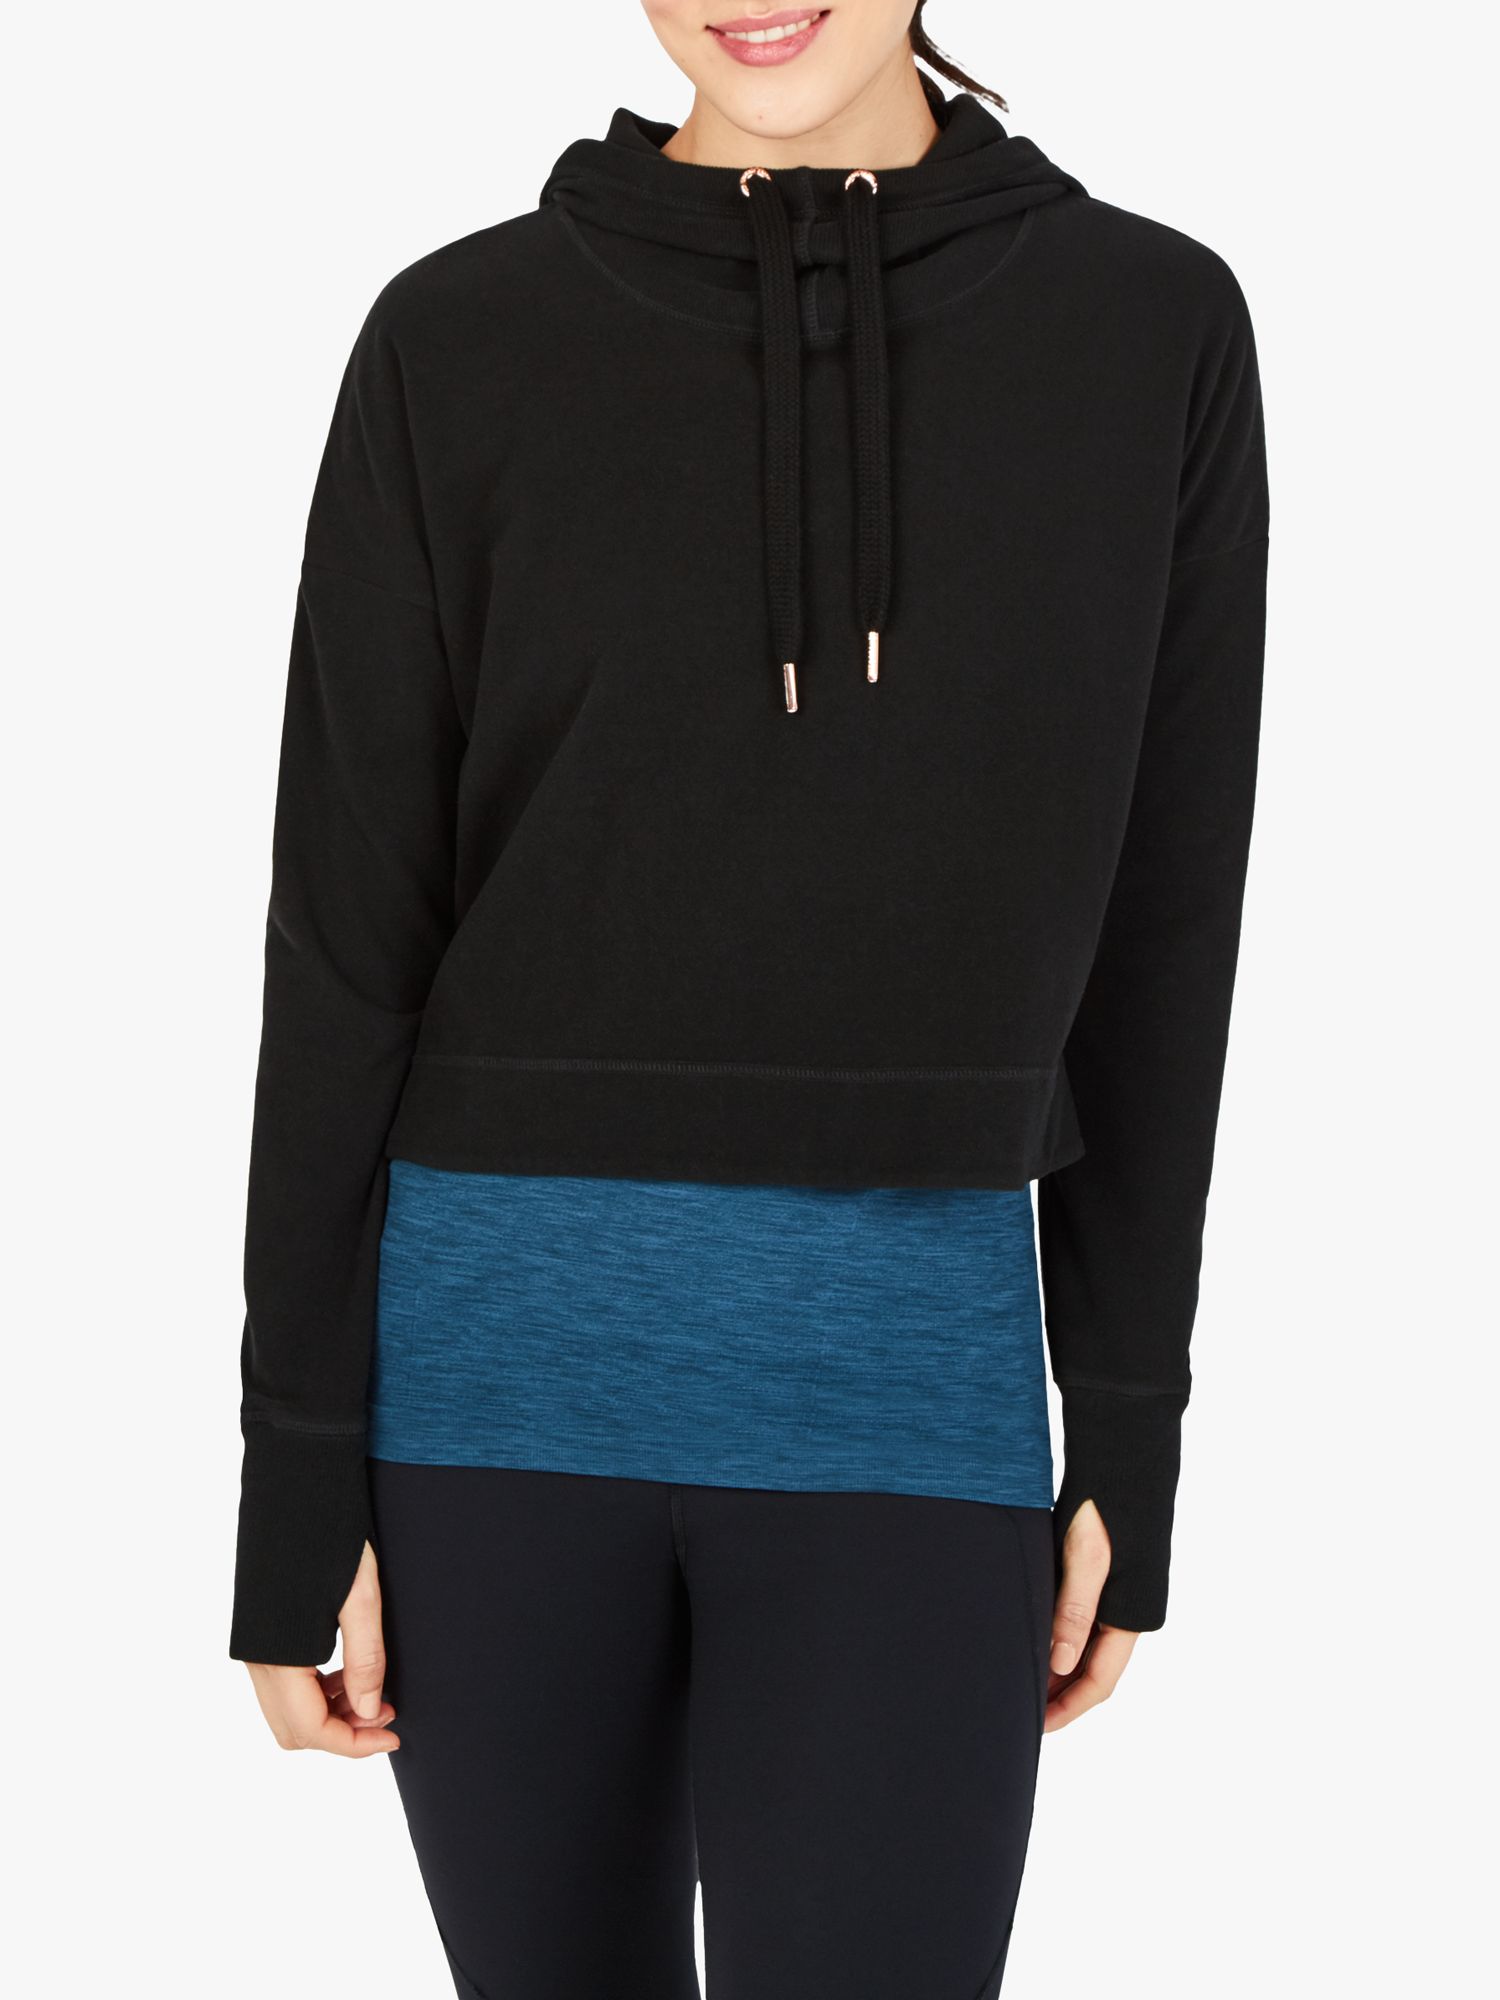 Sweaty Betty Escape Luxe Cropped Hoodie, Black at John Lewis & Partners